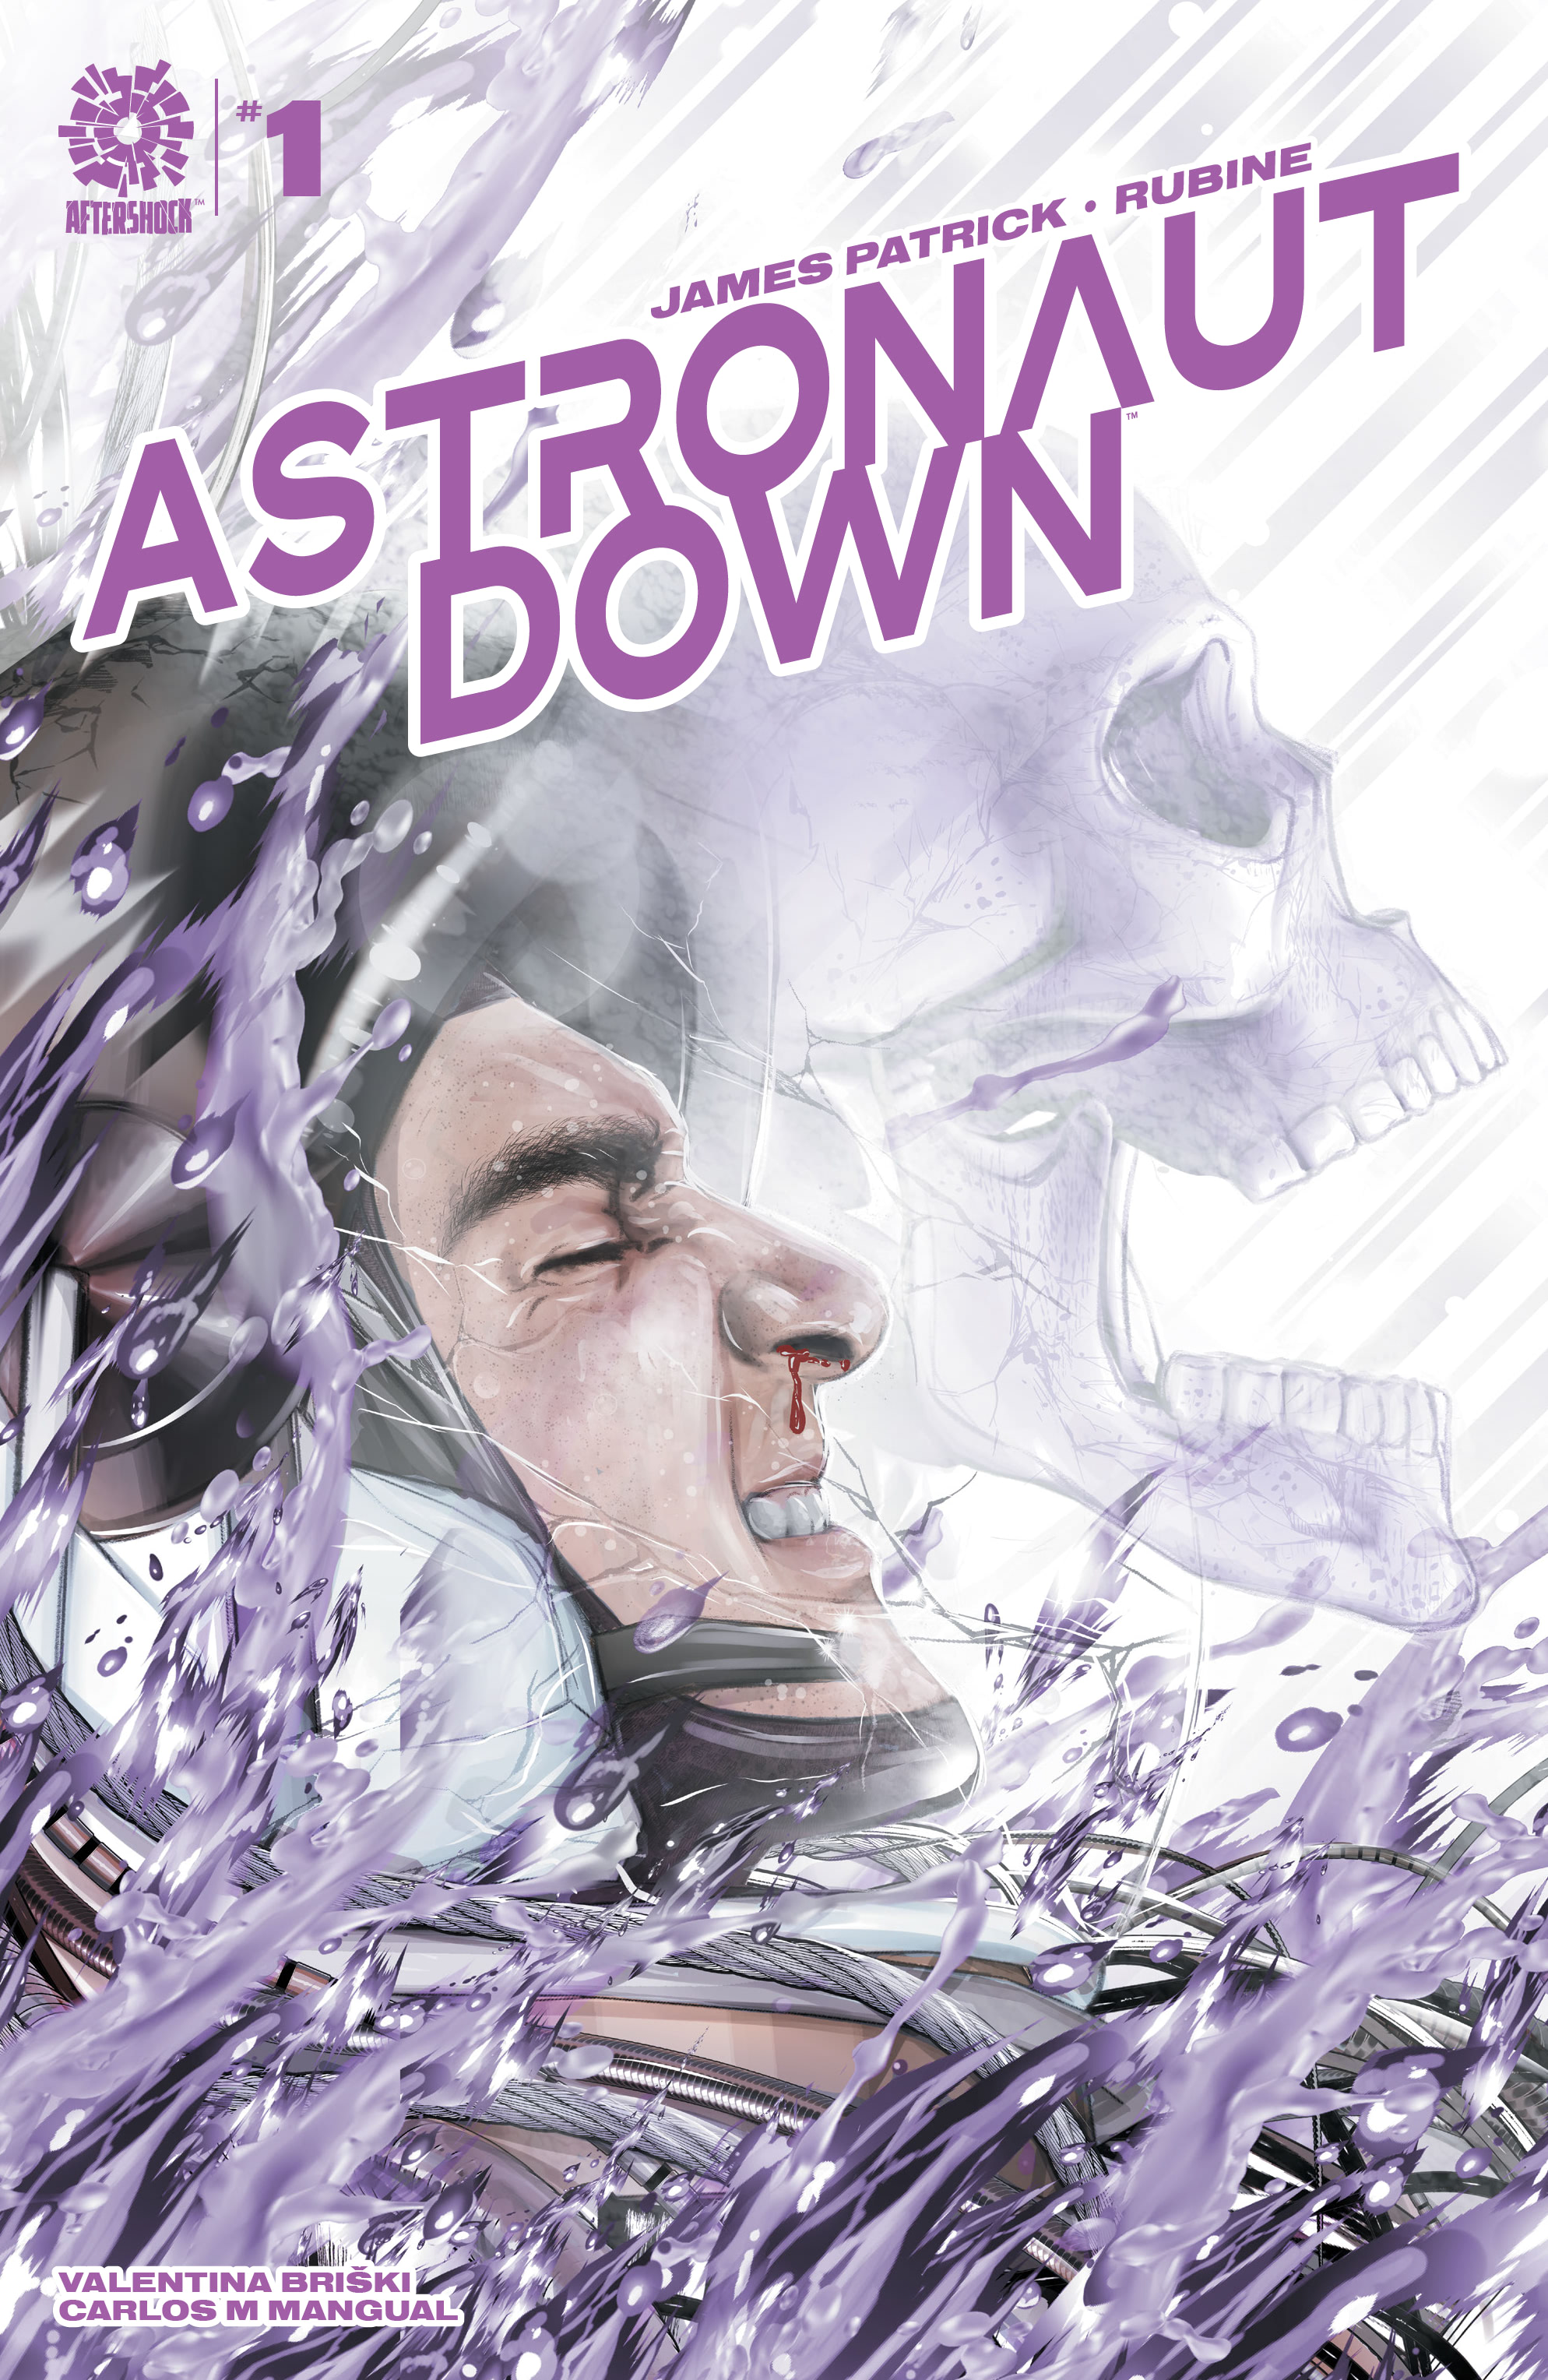 Read online Astronaut Down comic -  Issue #1 - 1